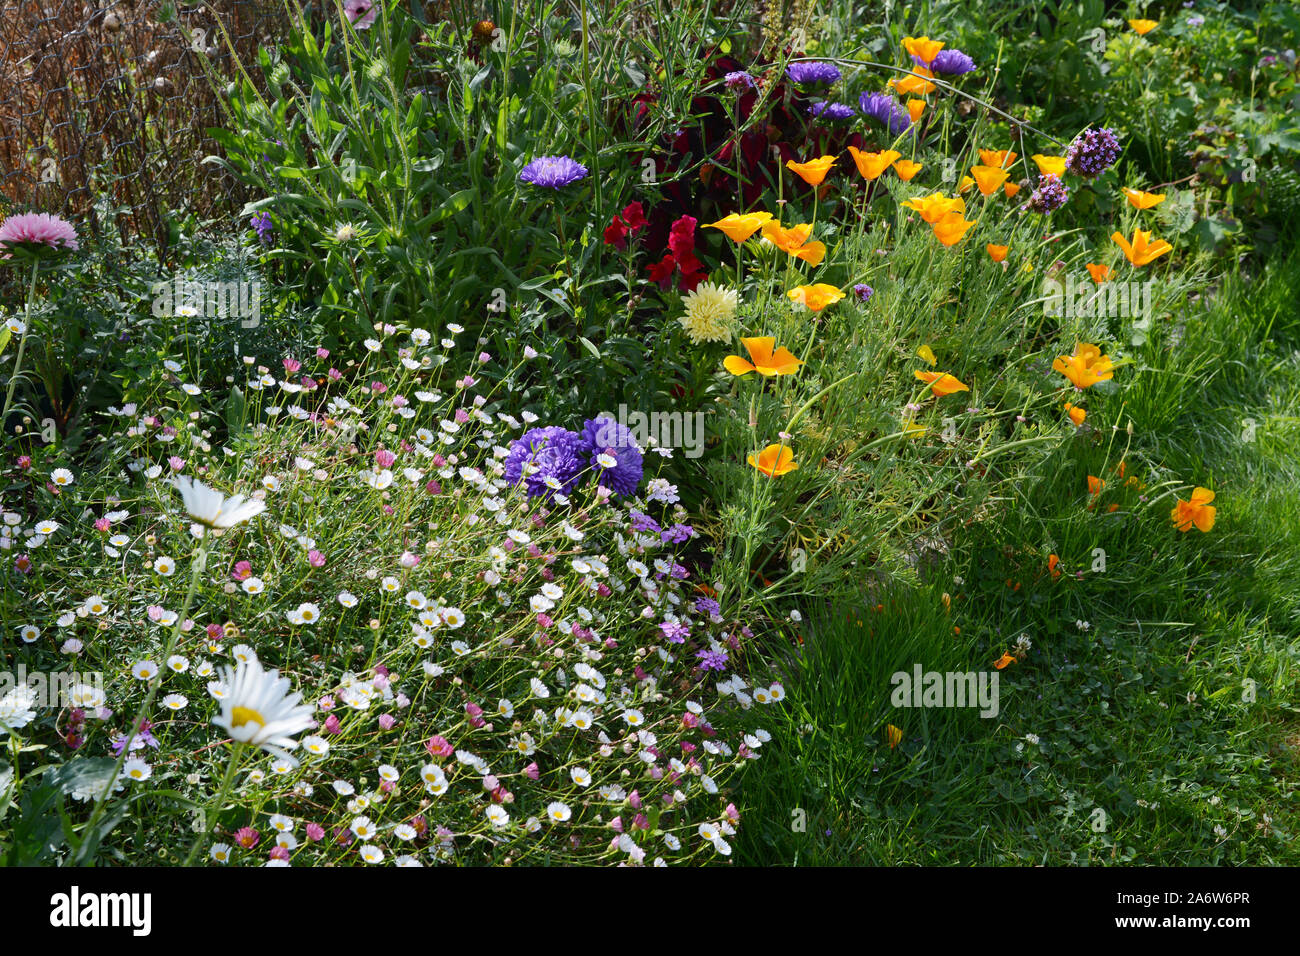 Flourishing summer flower bed in a garden with daisies, fleabane, asters and Californian poppies Stock Photo